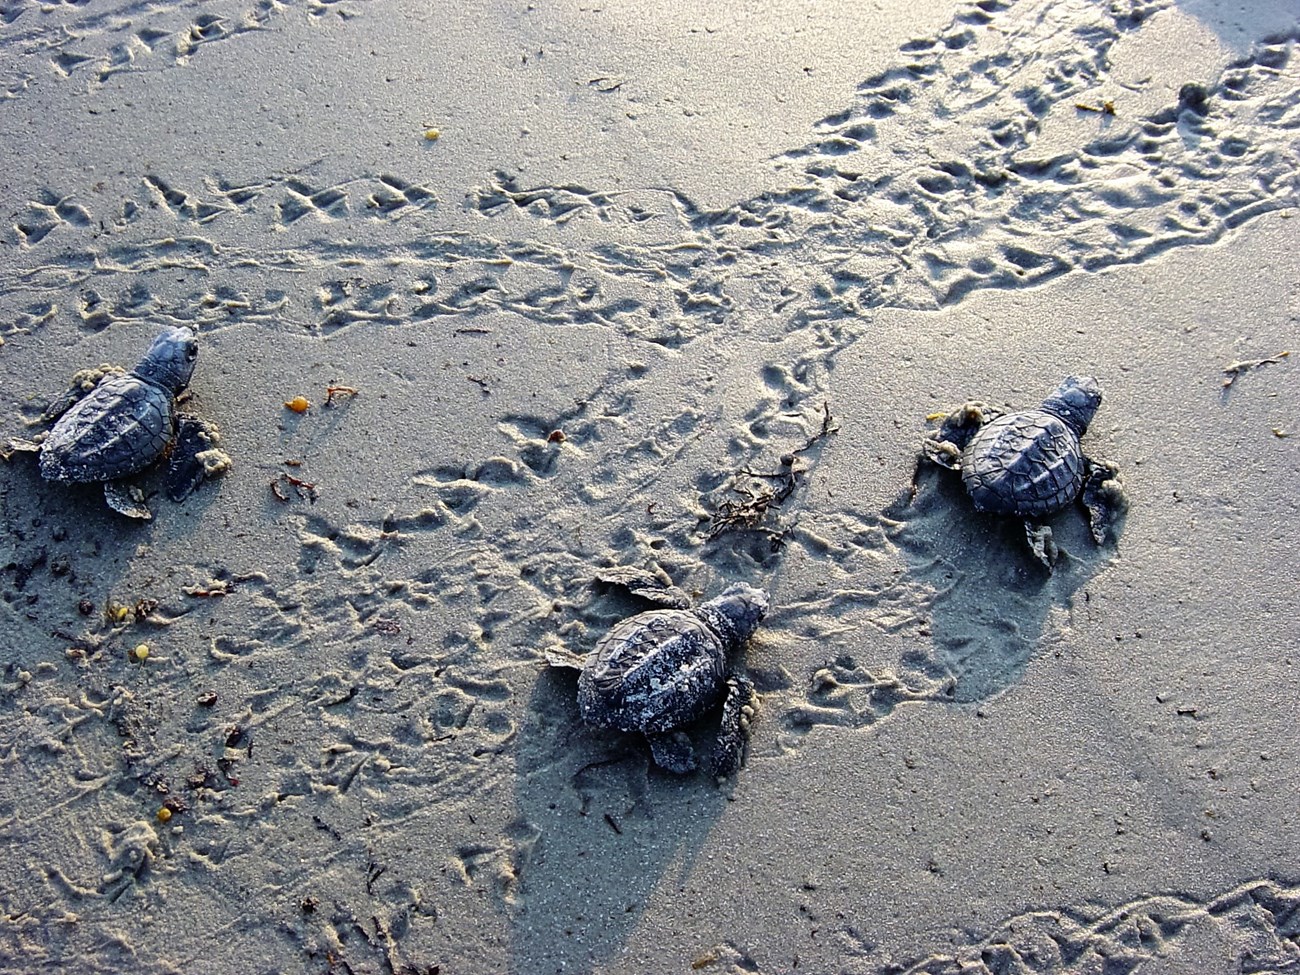 Kemp's ridley hatchling and their tracks on the beach.